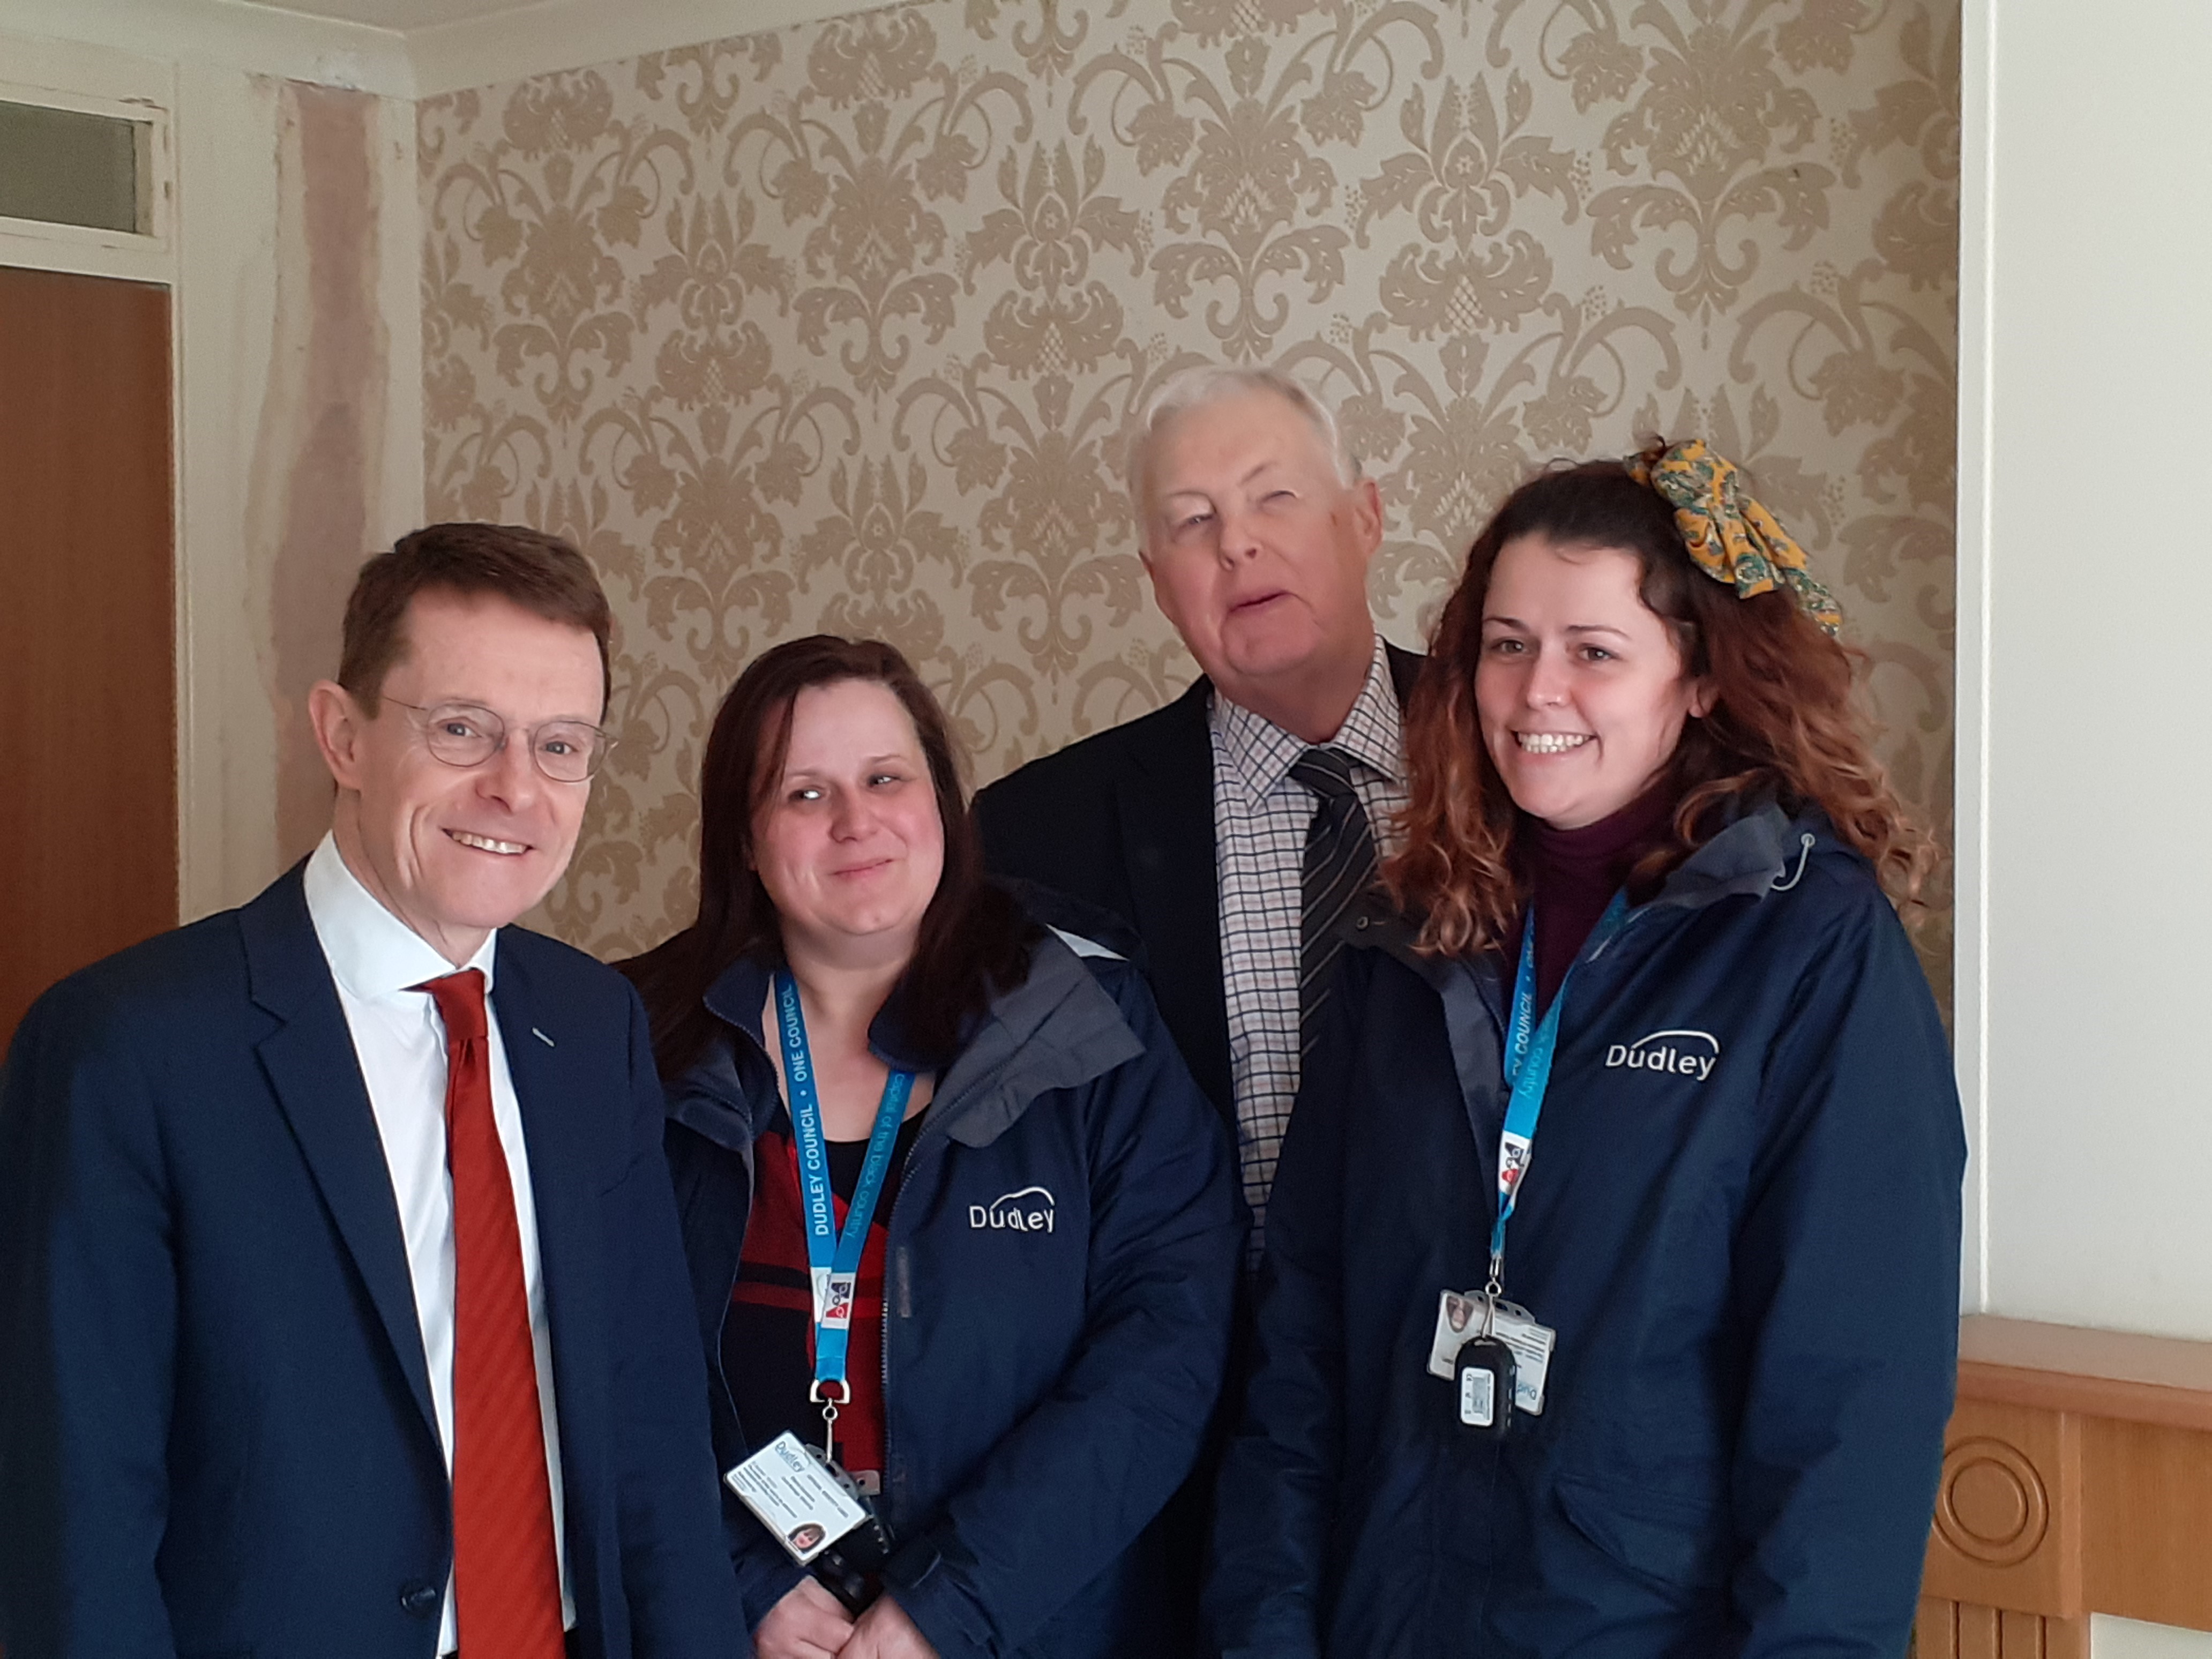 Mayor of the West Midlands, Andy Street (left) with intensive housing support officers, Diane Kendrick and Annabel Fuidge from Dudley Council and deputy leader Cllr David Vickers